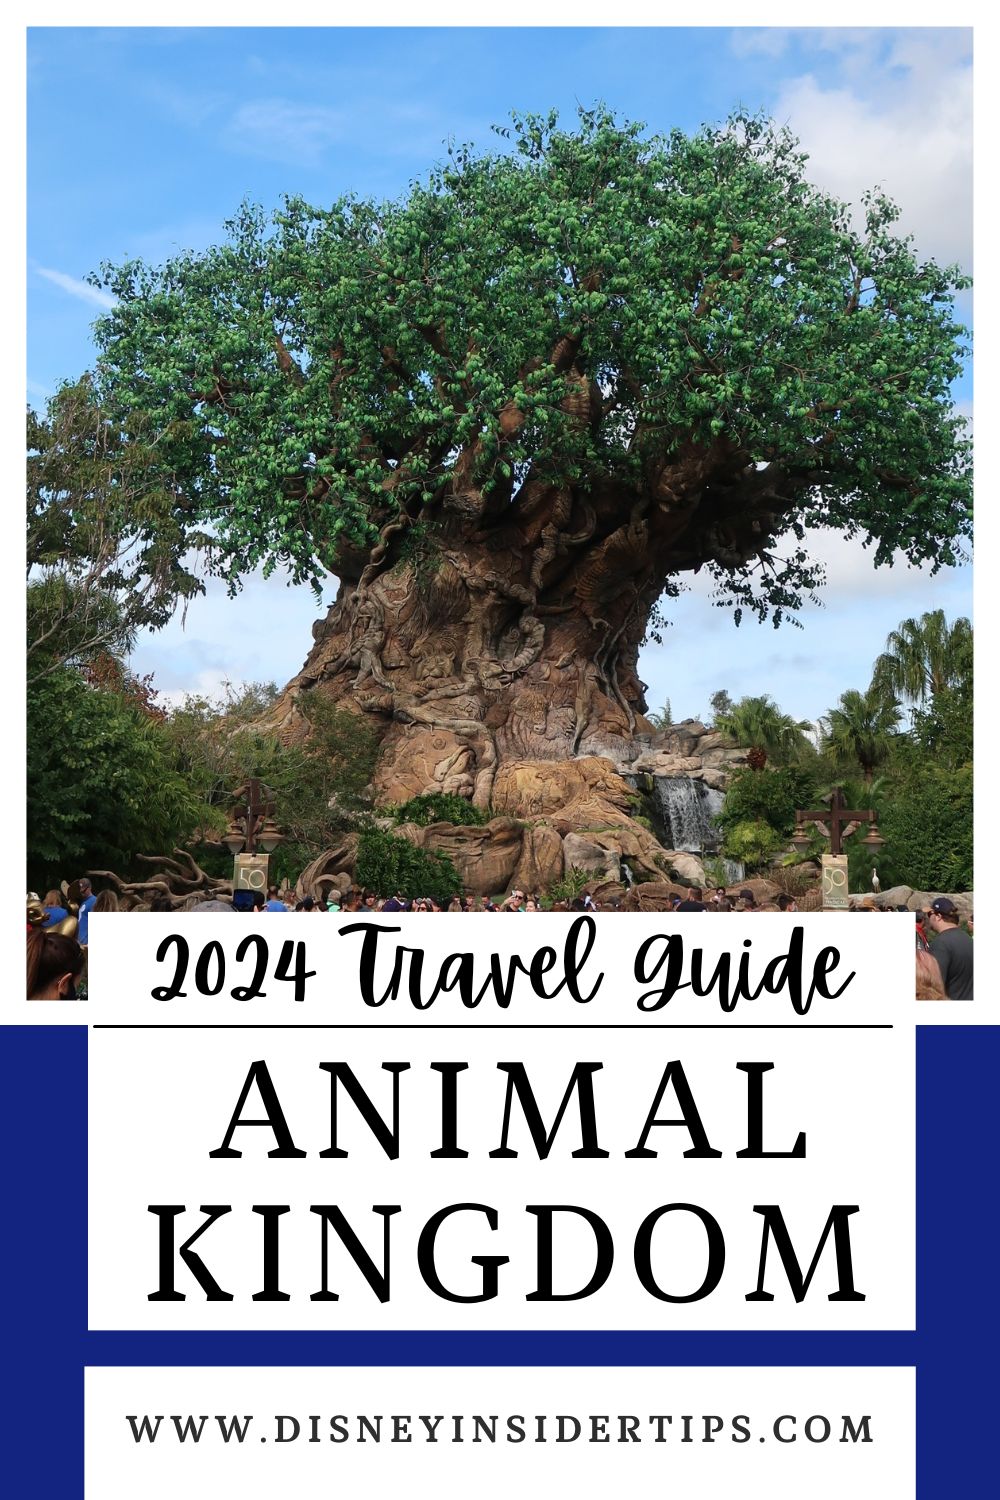 We hope this guide to Animal Kingdom helps you have a wonderful time! 

If you are looking for more detailed information, see the posts below